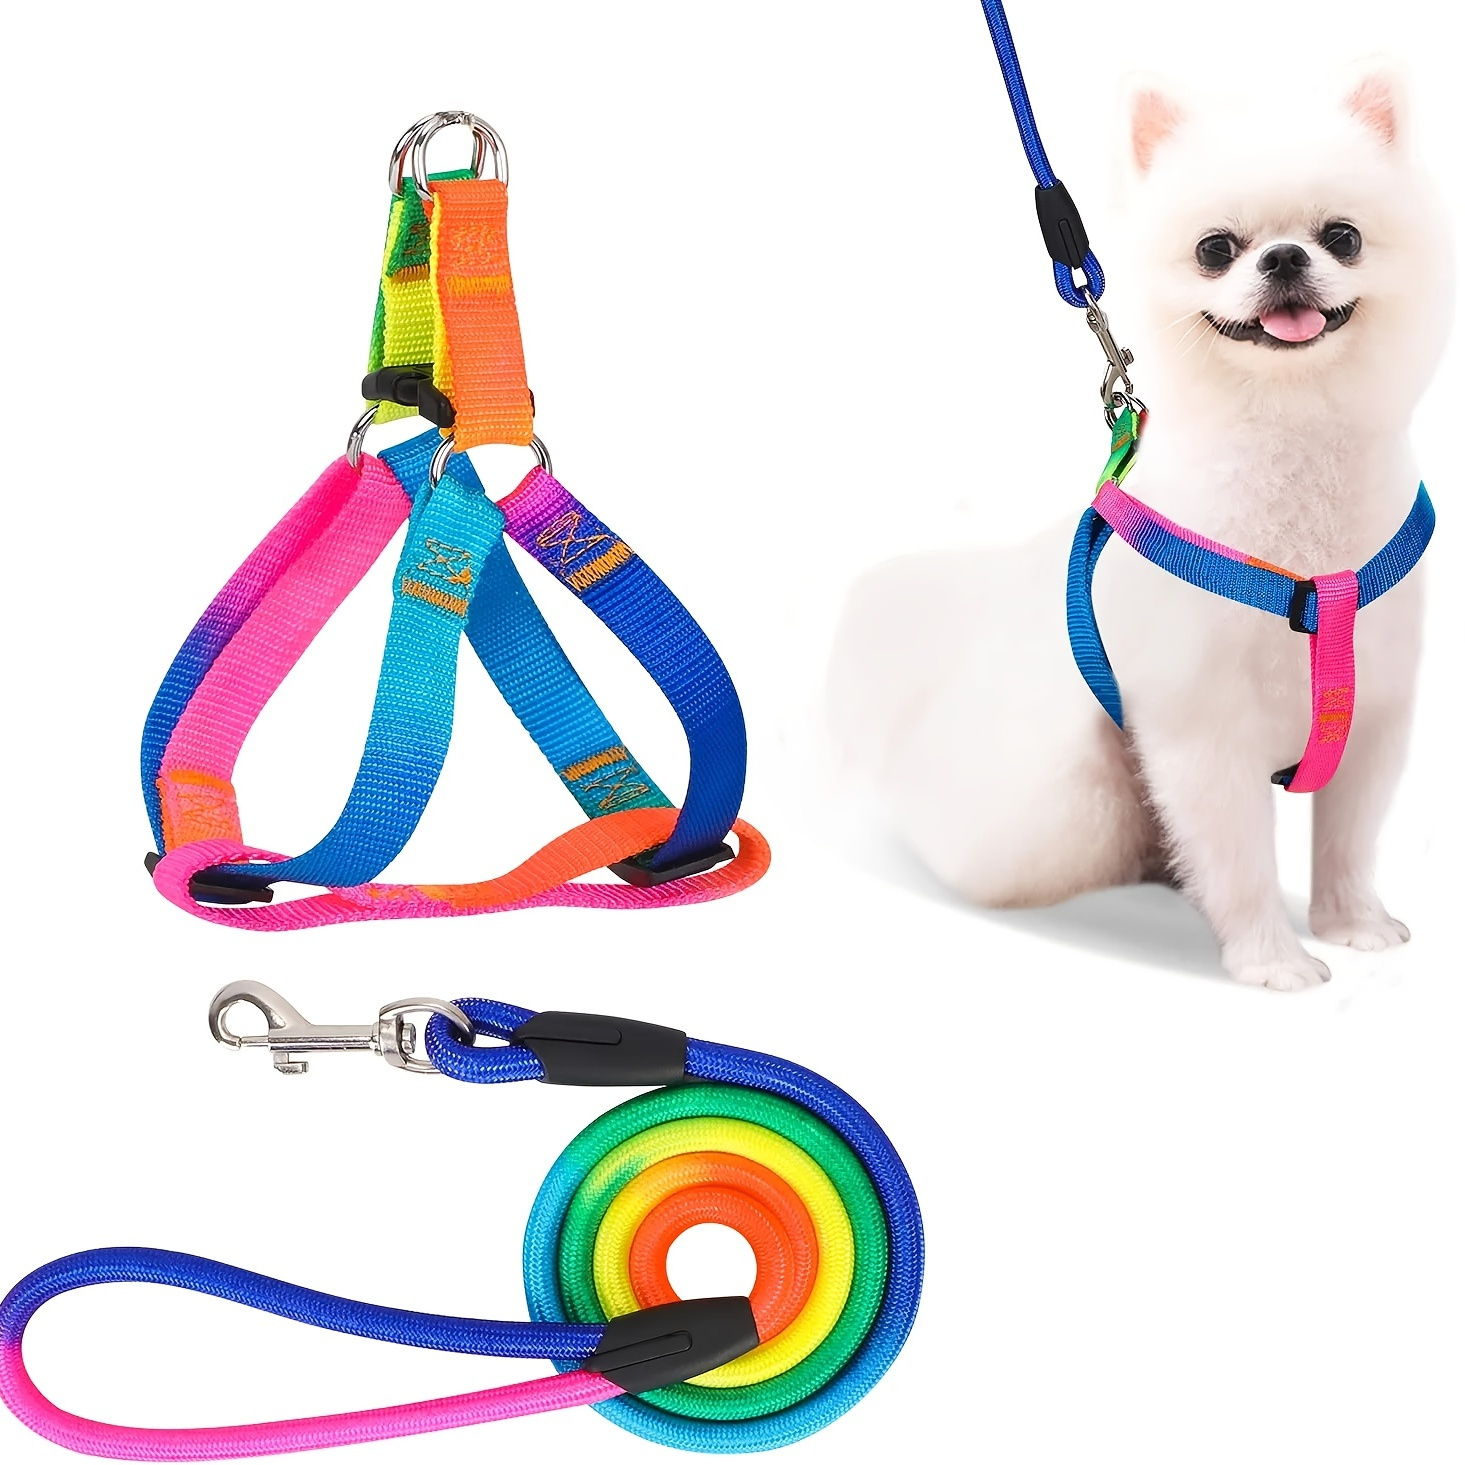 

Colorful No-pull Pet Harness And Leash Set For Small And Medium Dogs And Cats - Perfect For Outdoor Walking And Training